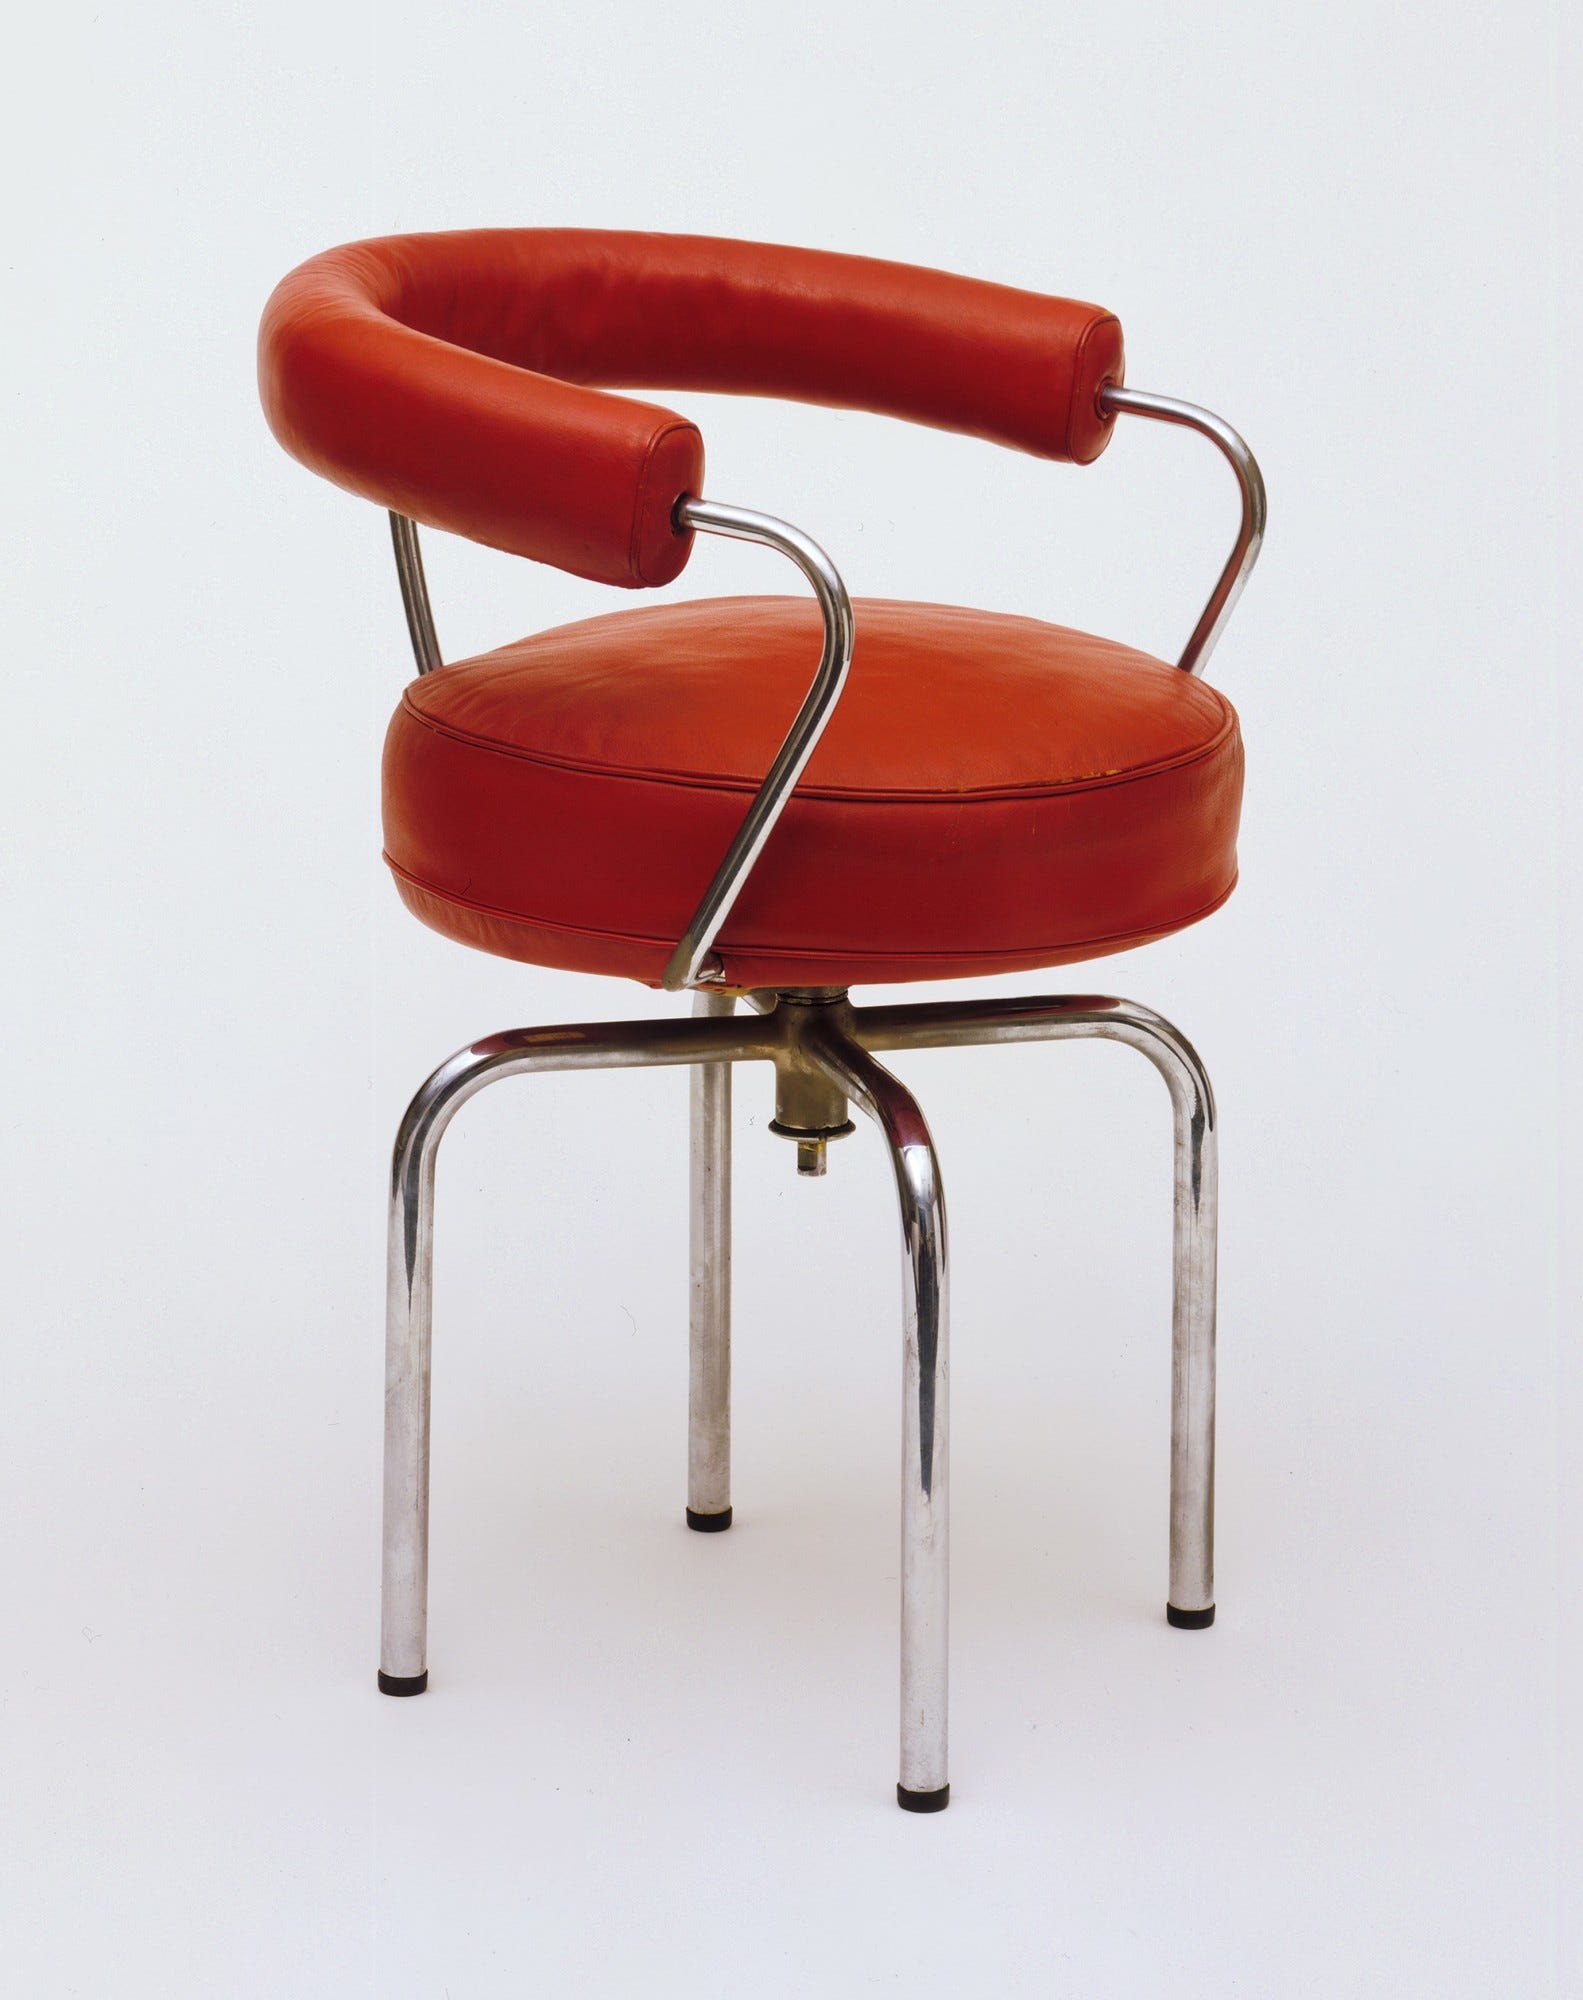 Charlotte Perriand's iconic designs